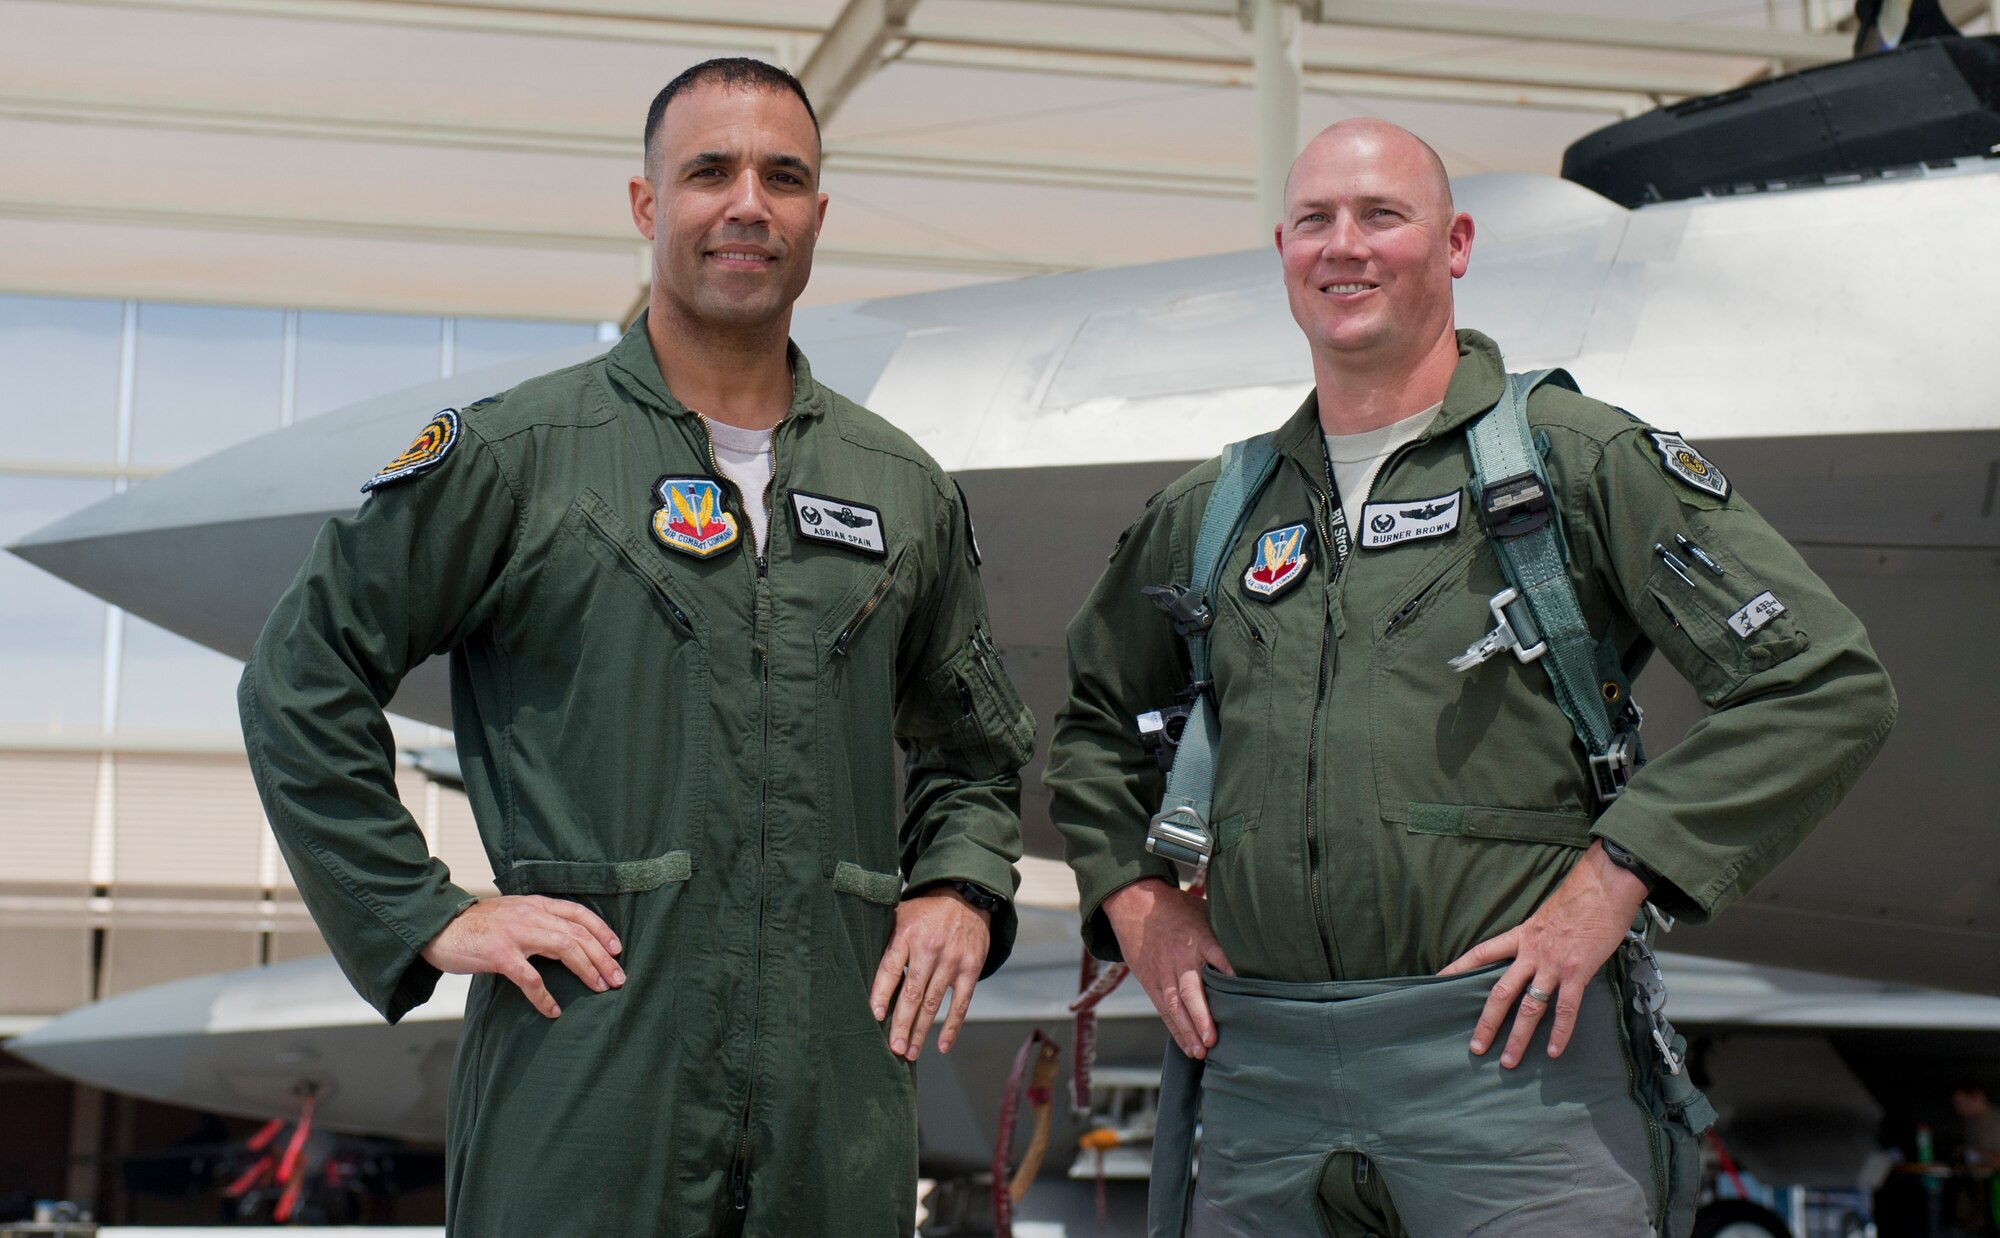 Col. Adrian Spain, U.S. Air Force Weapons School commandant, and Lt. Col. Robert Brown, 433rd Weapons Squadron commander, pose for a picture after Spain’s final flight as the USAFWS commandant at Nellis Air Force Base, Nev., May 11, 2015. Spain is projected to take the 53rd Wing commander position at Eglin AFB, Fla. (U.S. Air Force photo by Airman 1st Class Mikaley Towle)